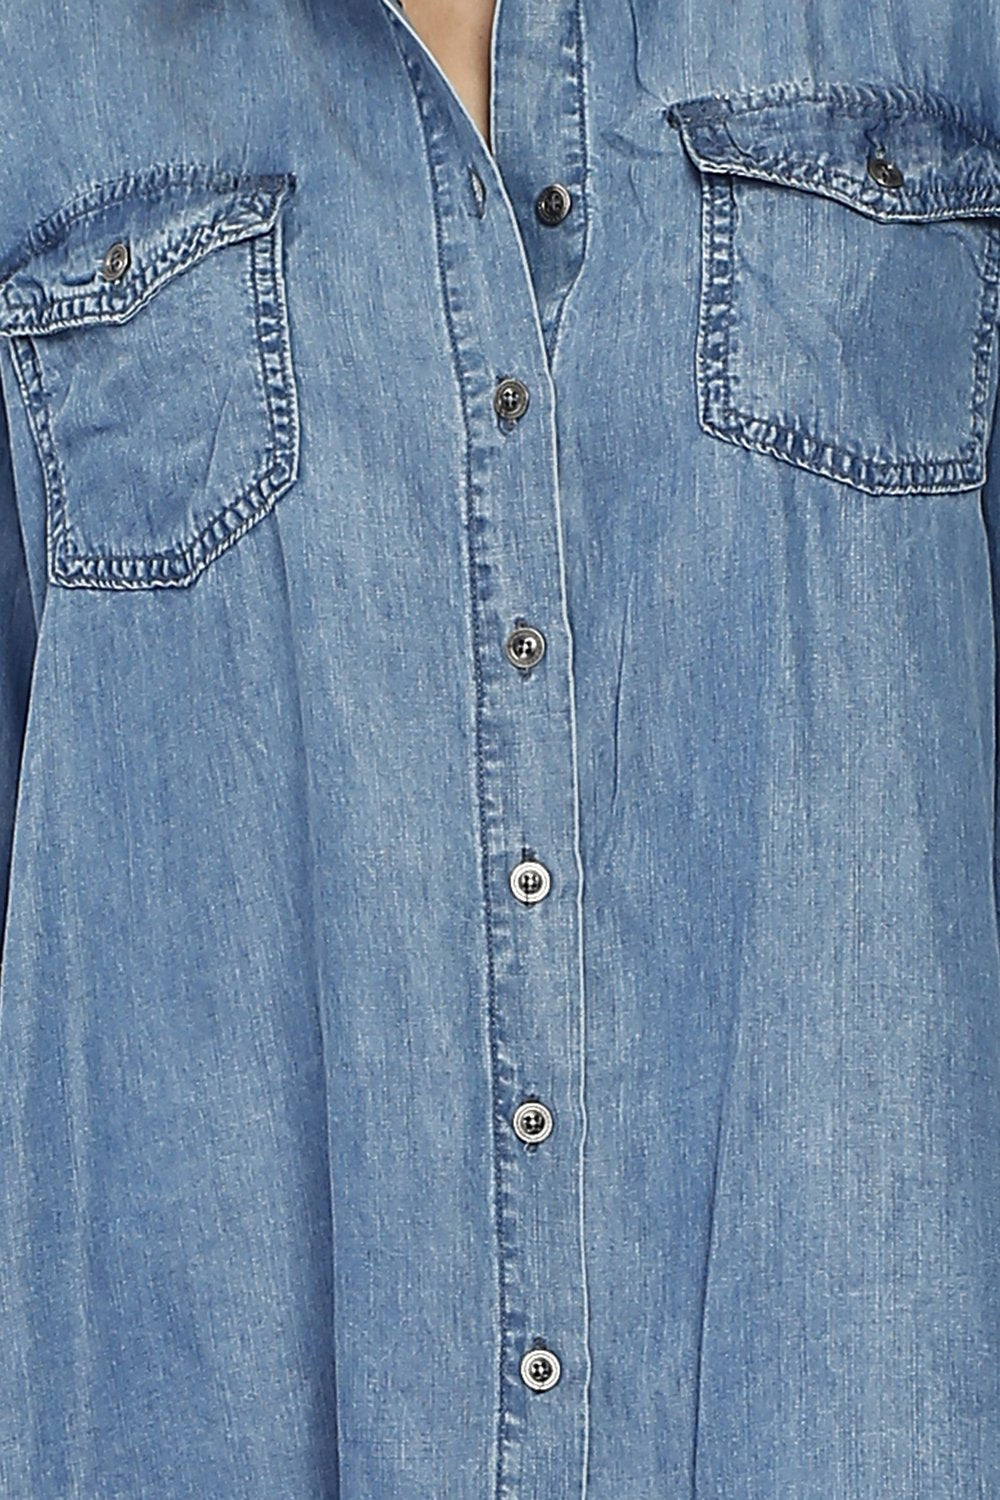 JEAN SHIRT WITH FRONT POCKETS